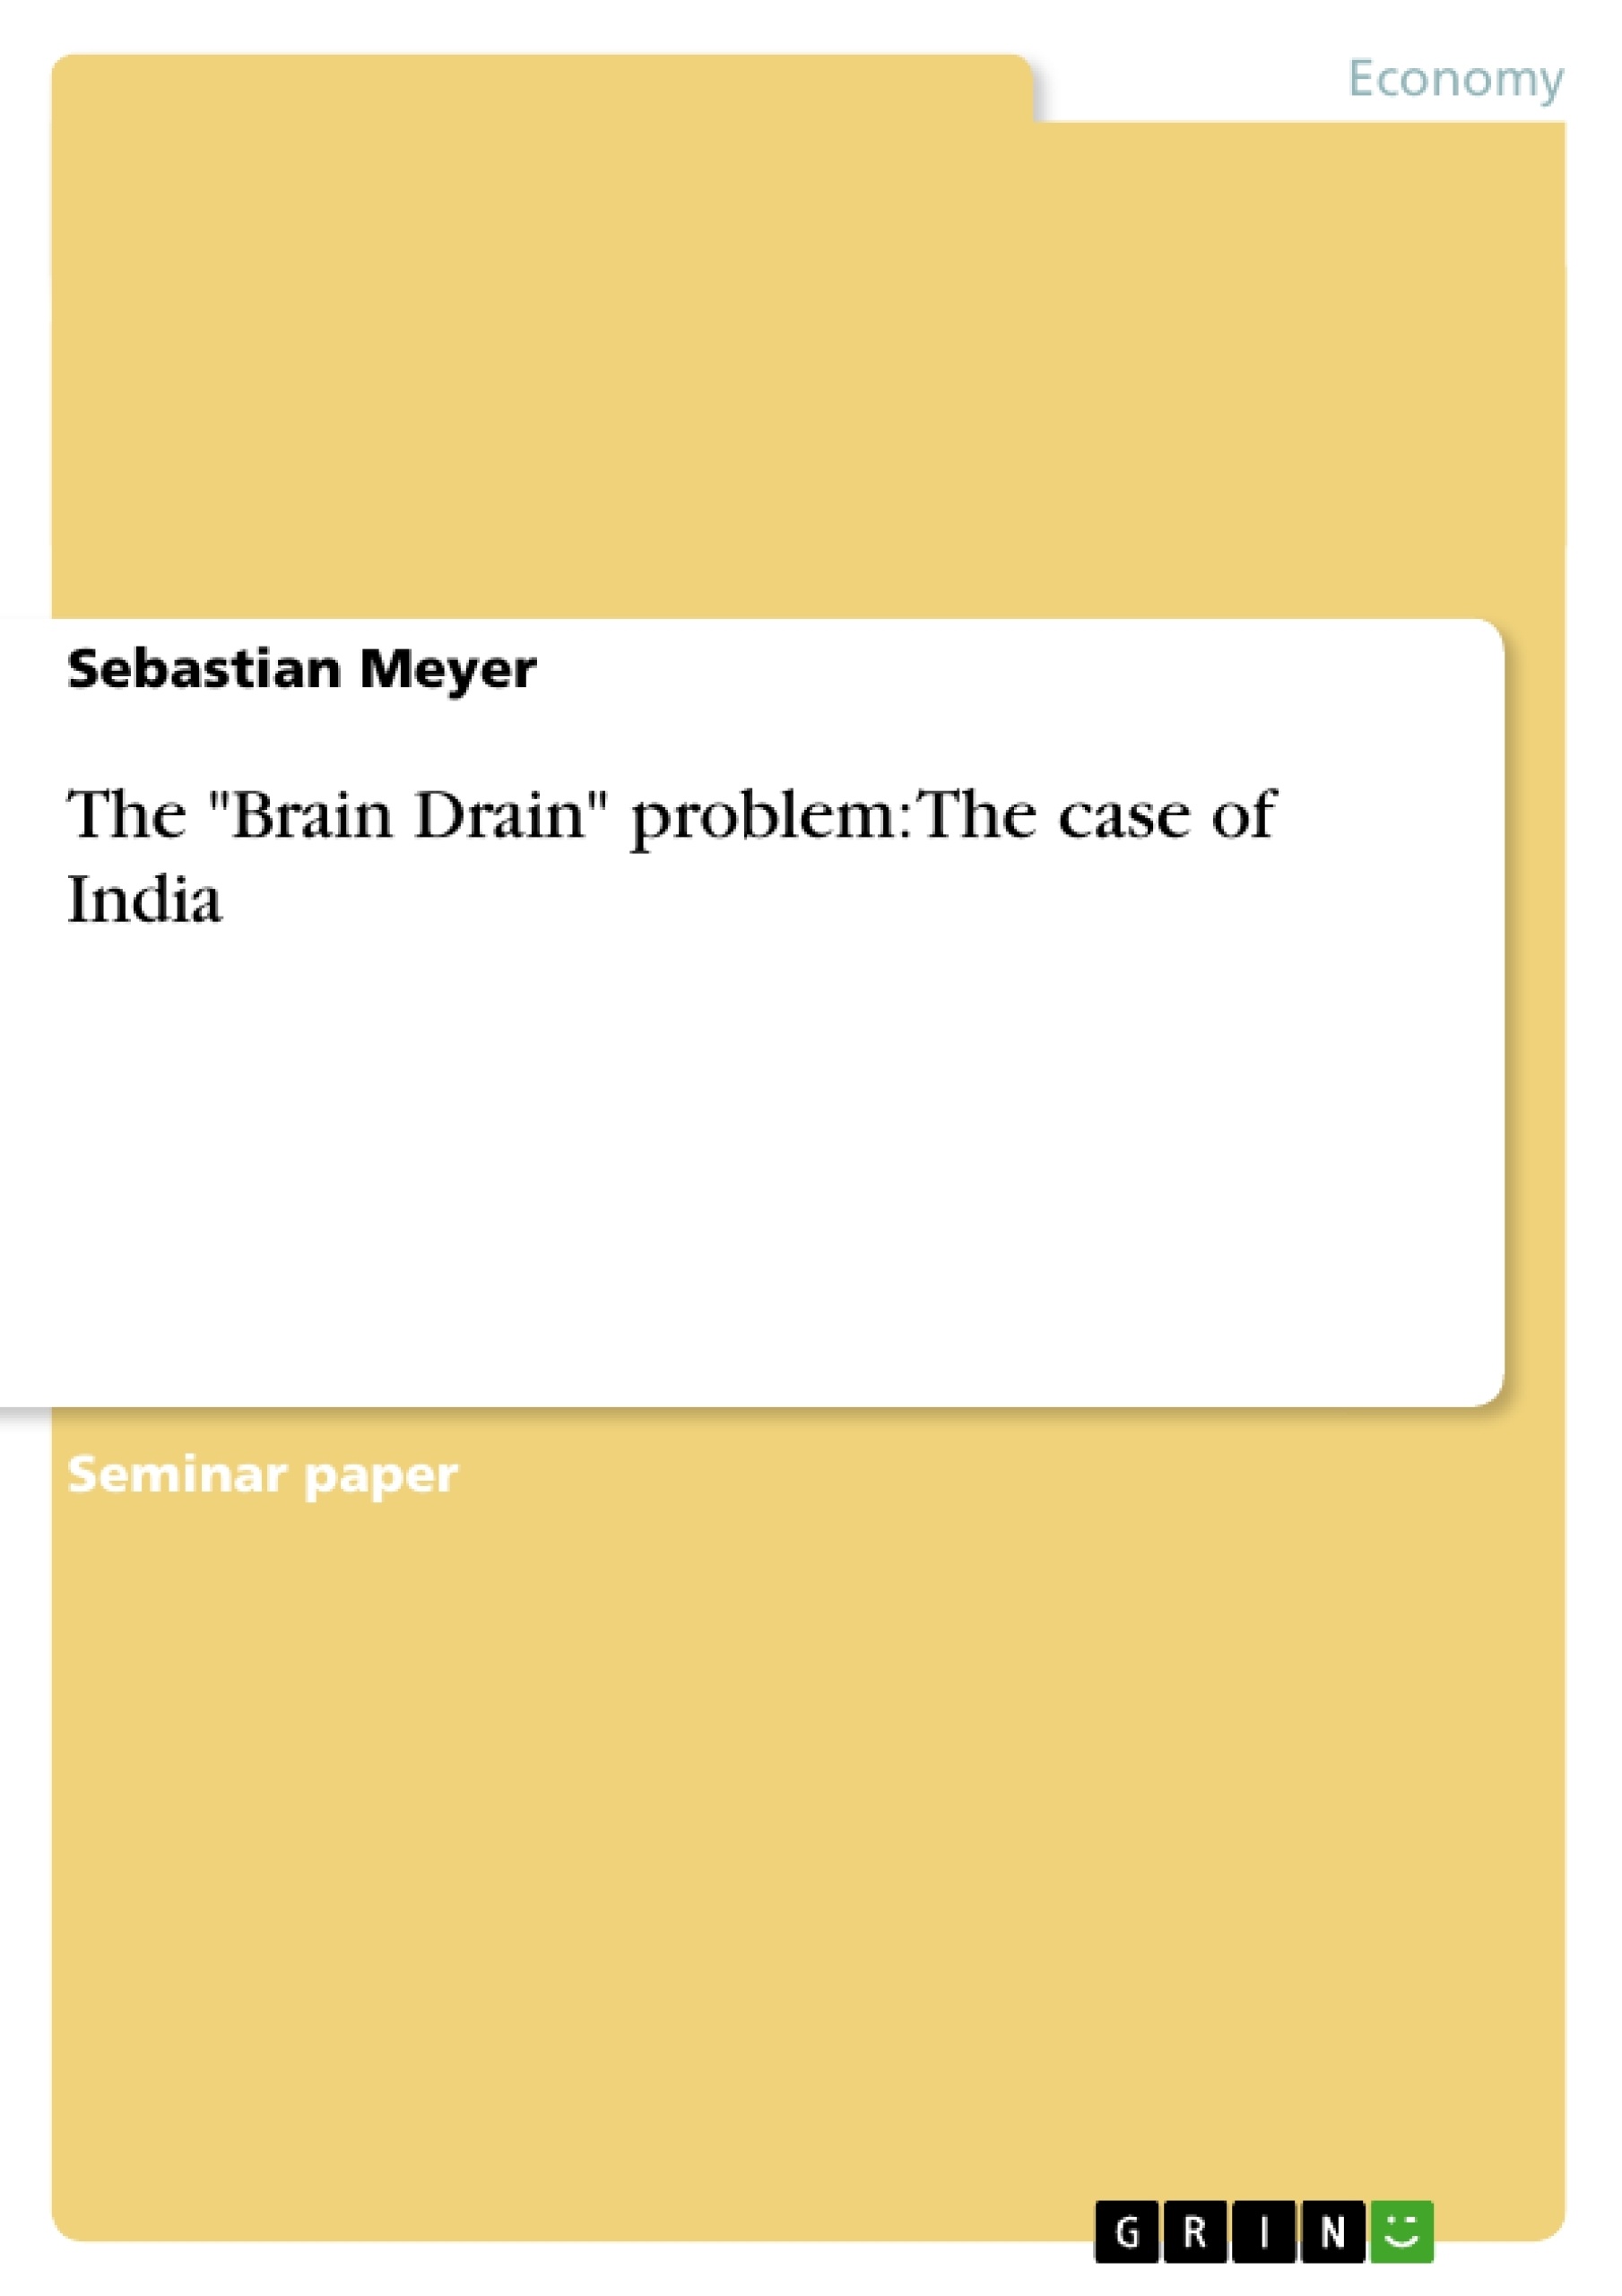 Title: The "Brain Drain" problem: The case of India